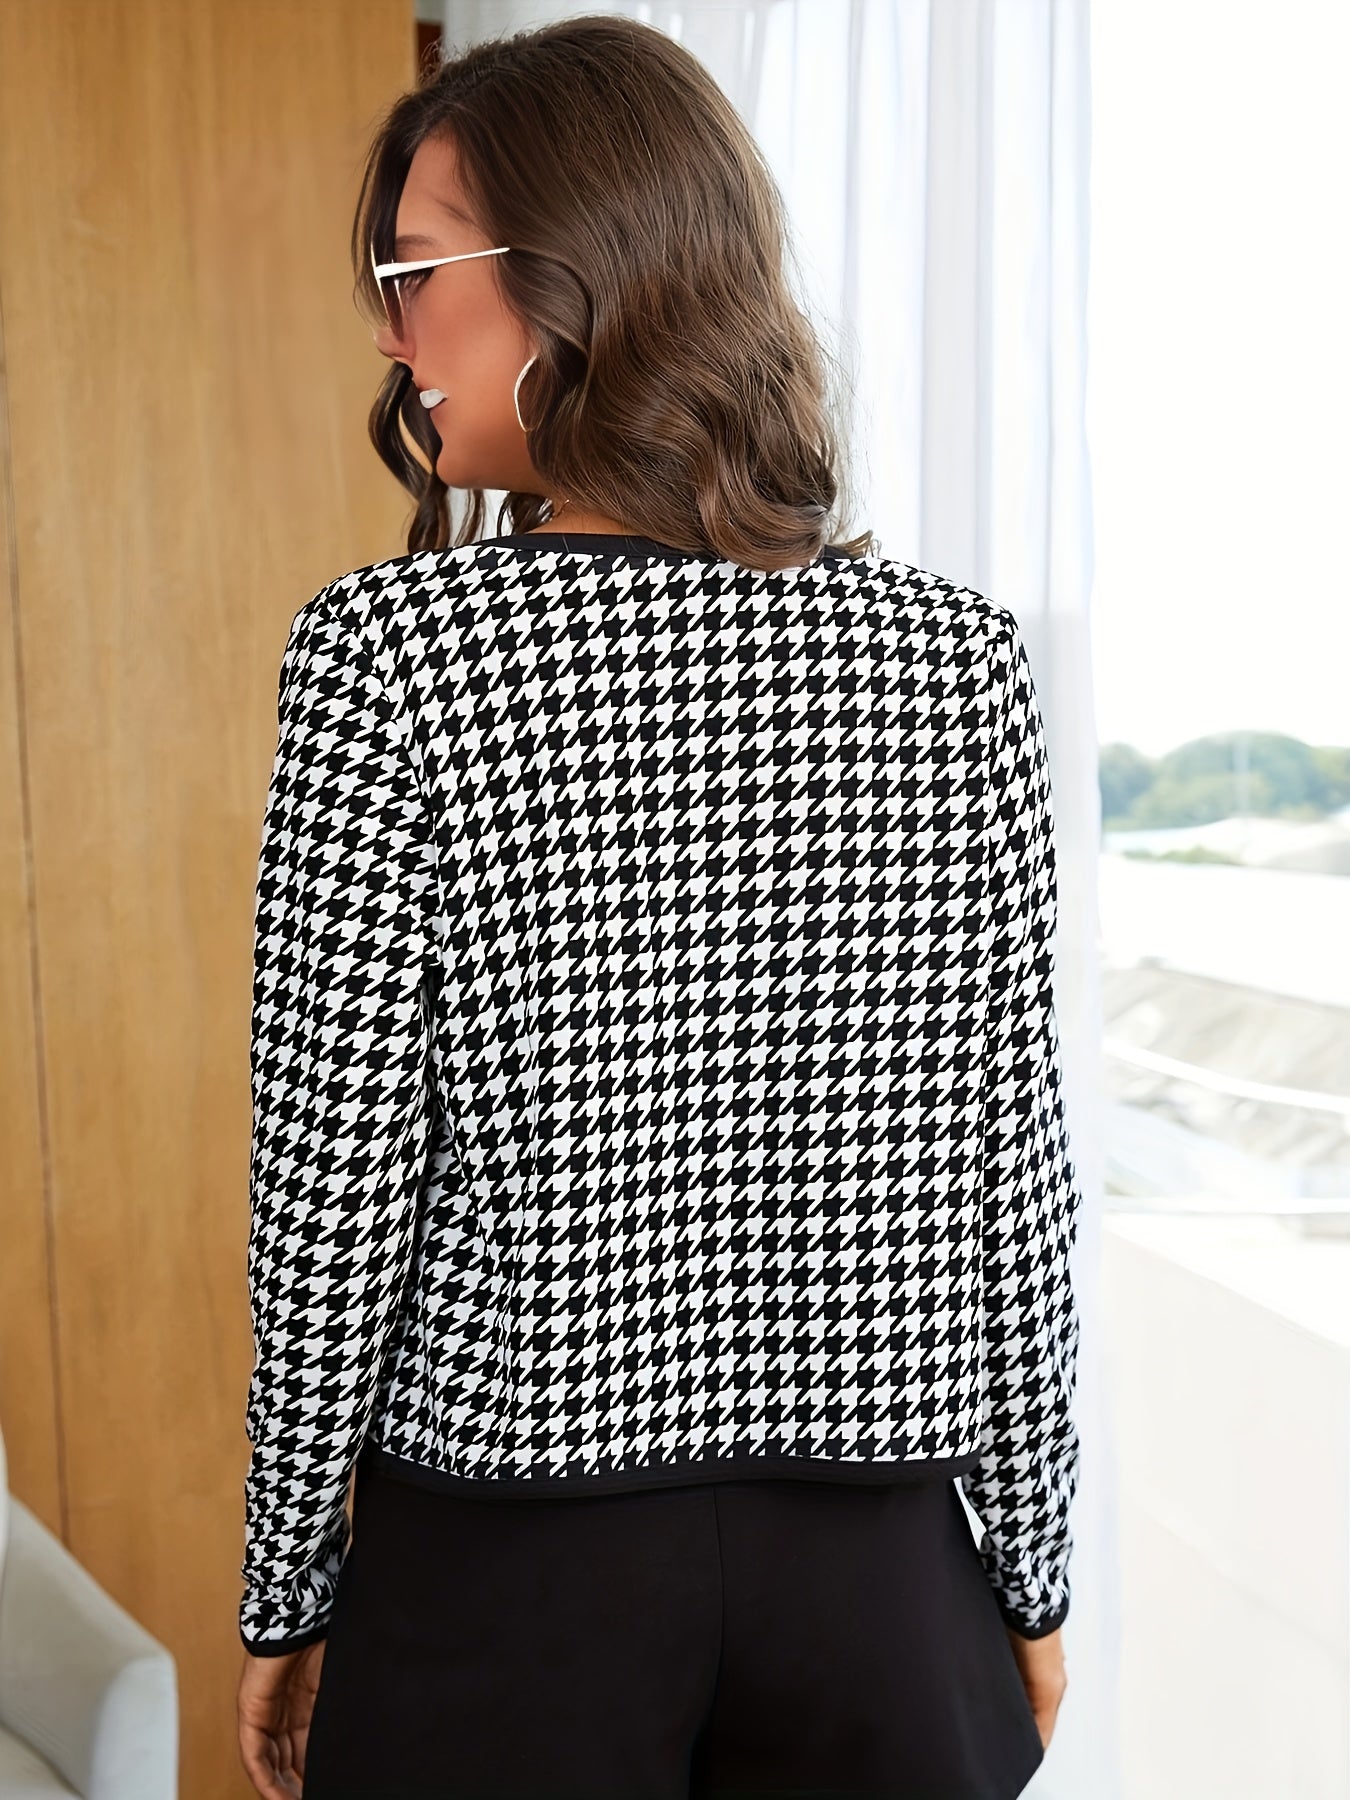 Houndstooth Contrast Trim Jacket, Elegant Open Front Long Sleeve Jacket For Spring & Fall, Women's Clothing